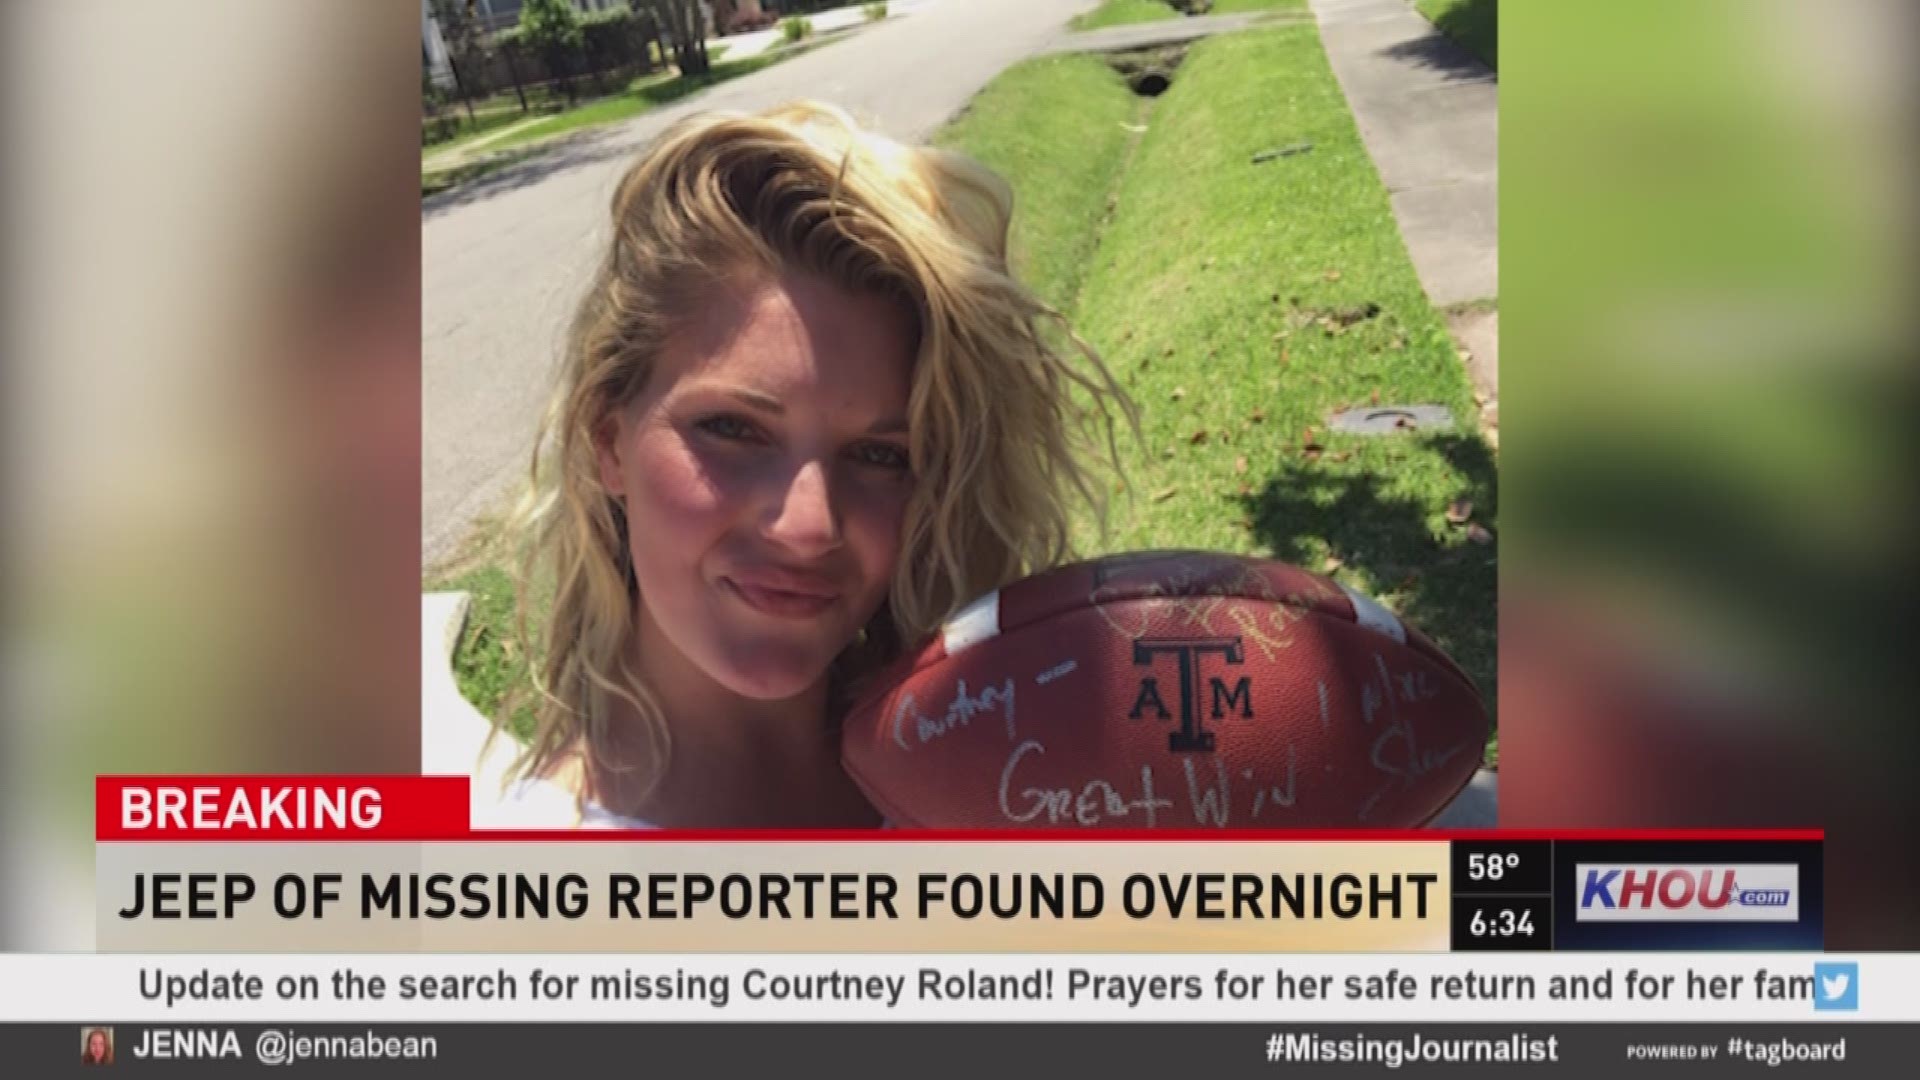 KHOU 11's Michelle Choi reports from the Galleria area on the disappearance of Courtney Roland